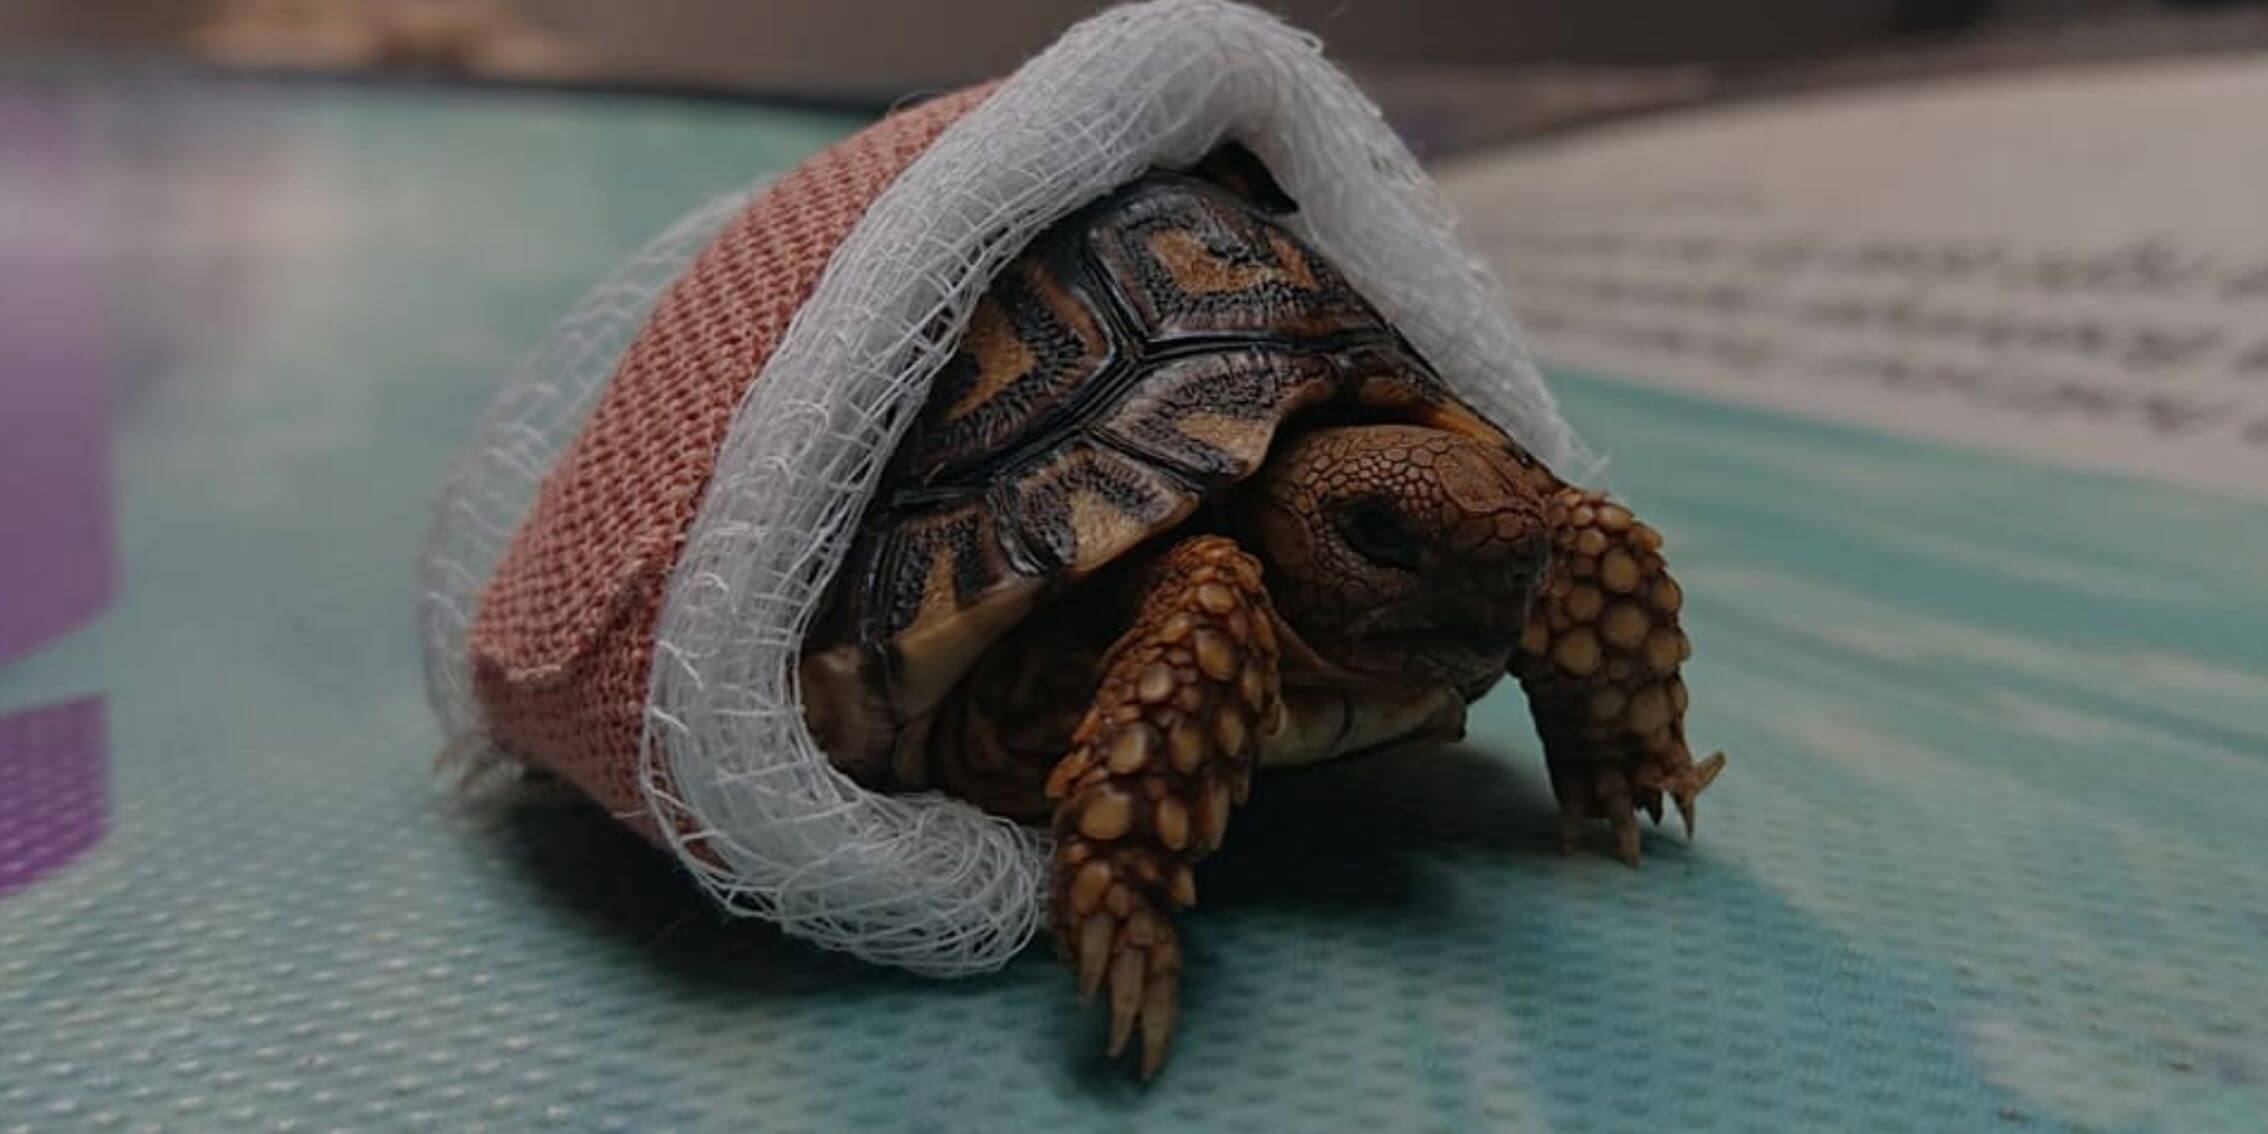 Injured baby tortoise gets and adorable Bandage